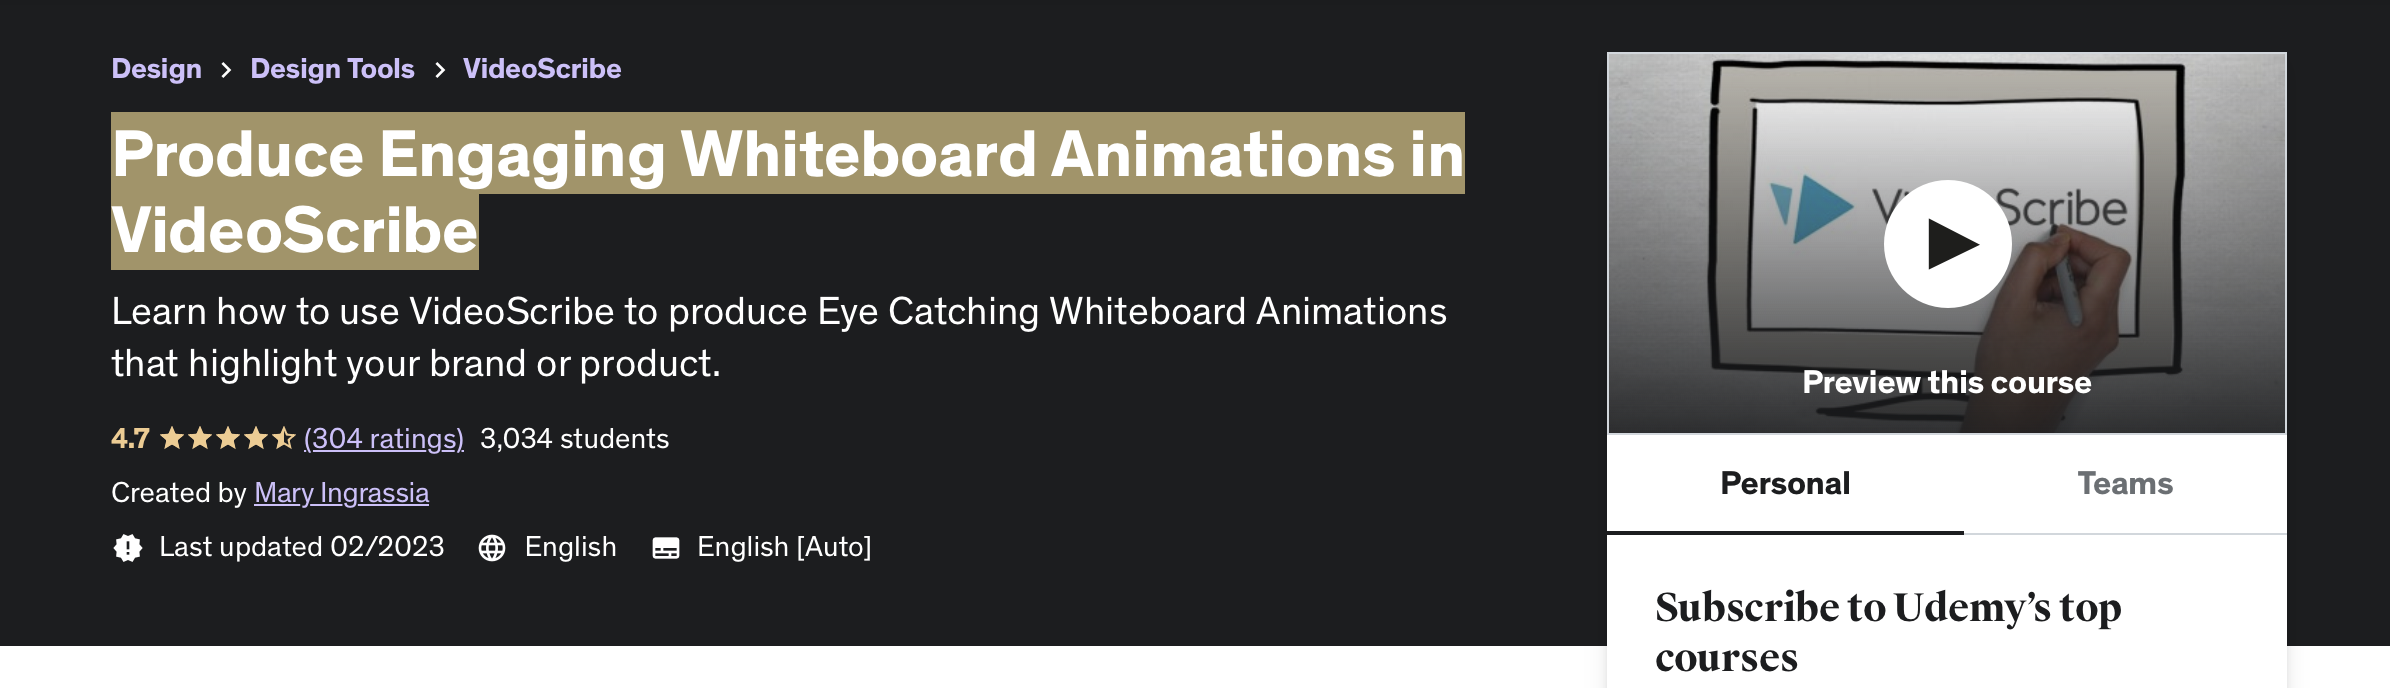 Produce Engaging Whiteboard Animations in